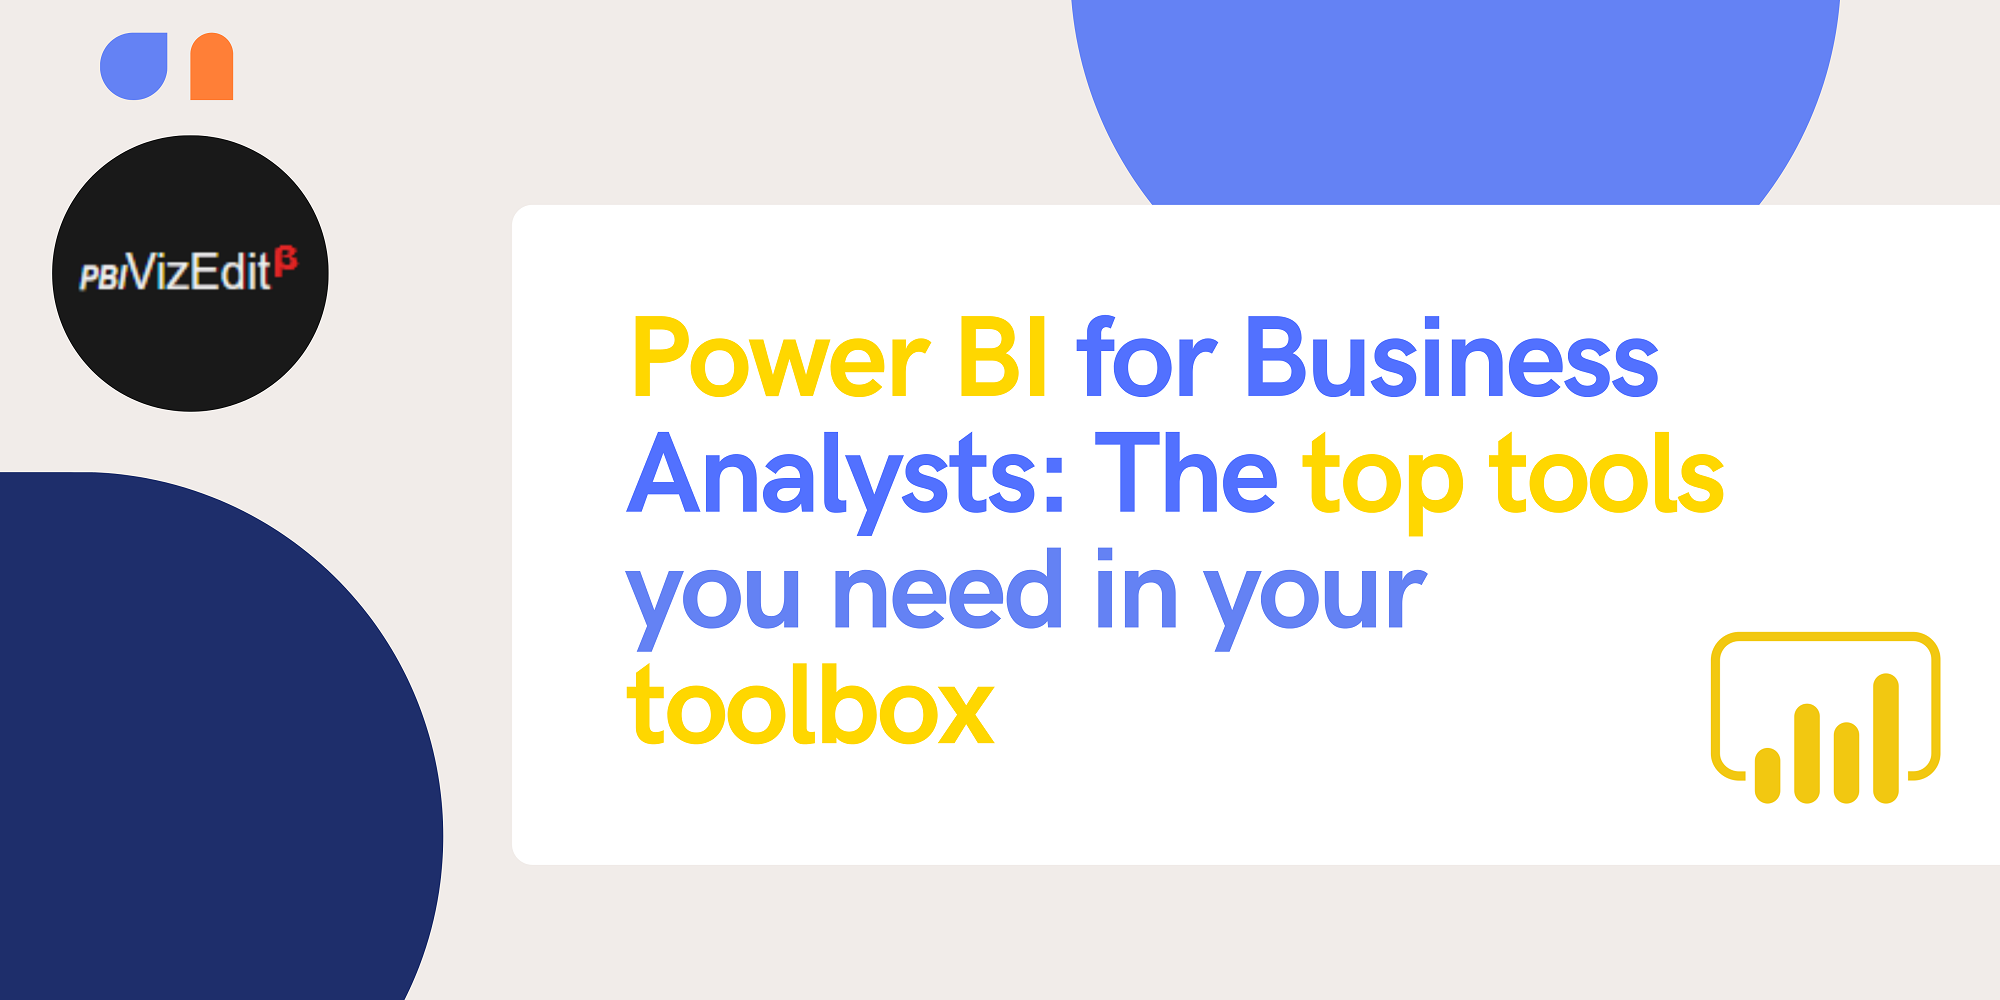 Power BI for Business Analysts: The top tools you need in your toolbox